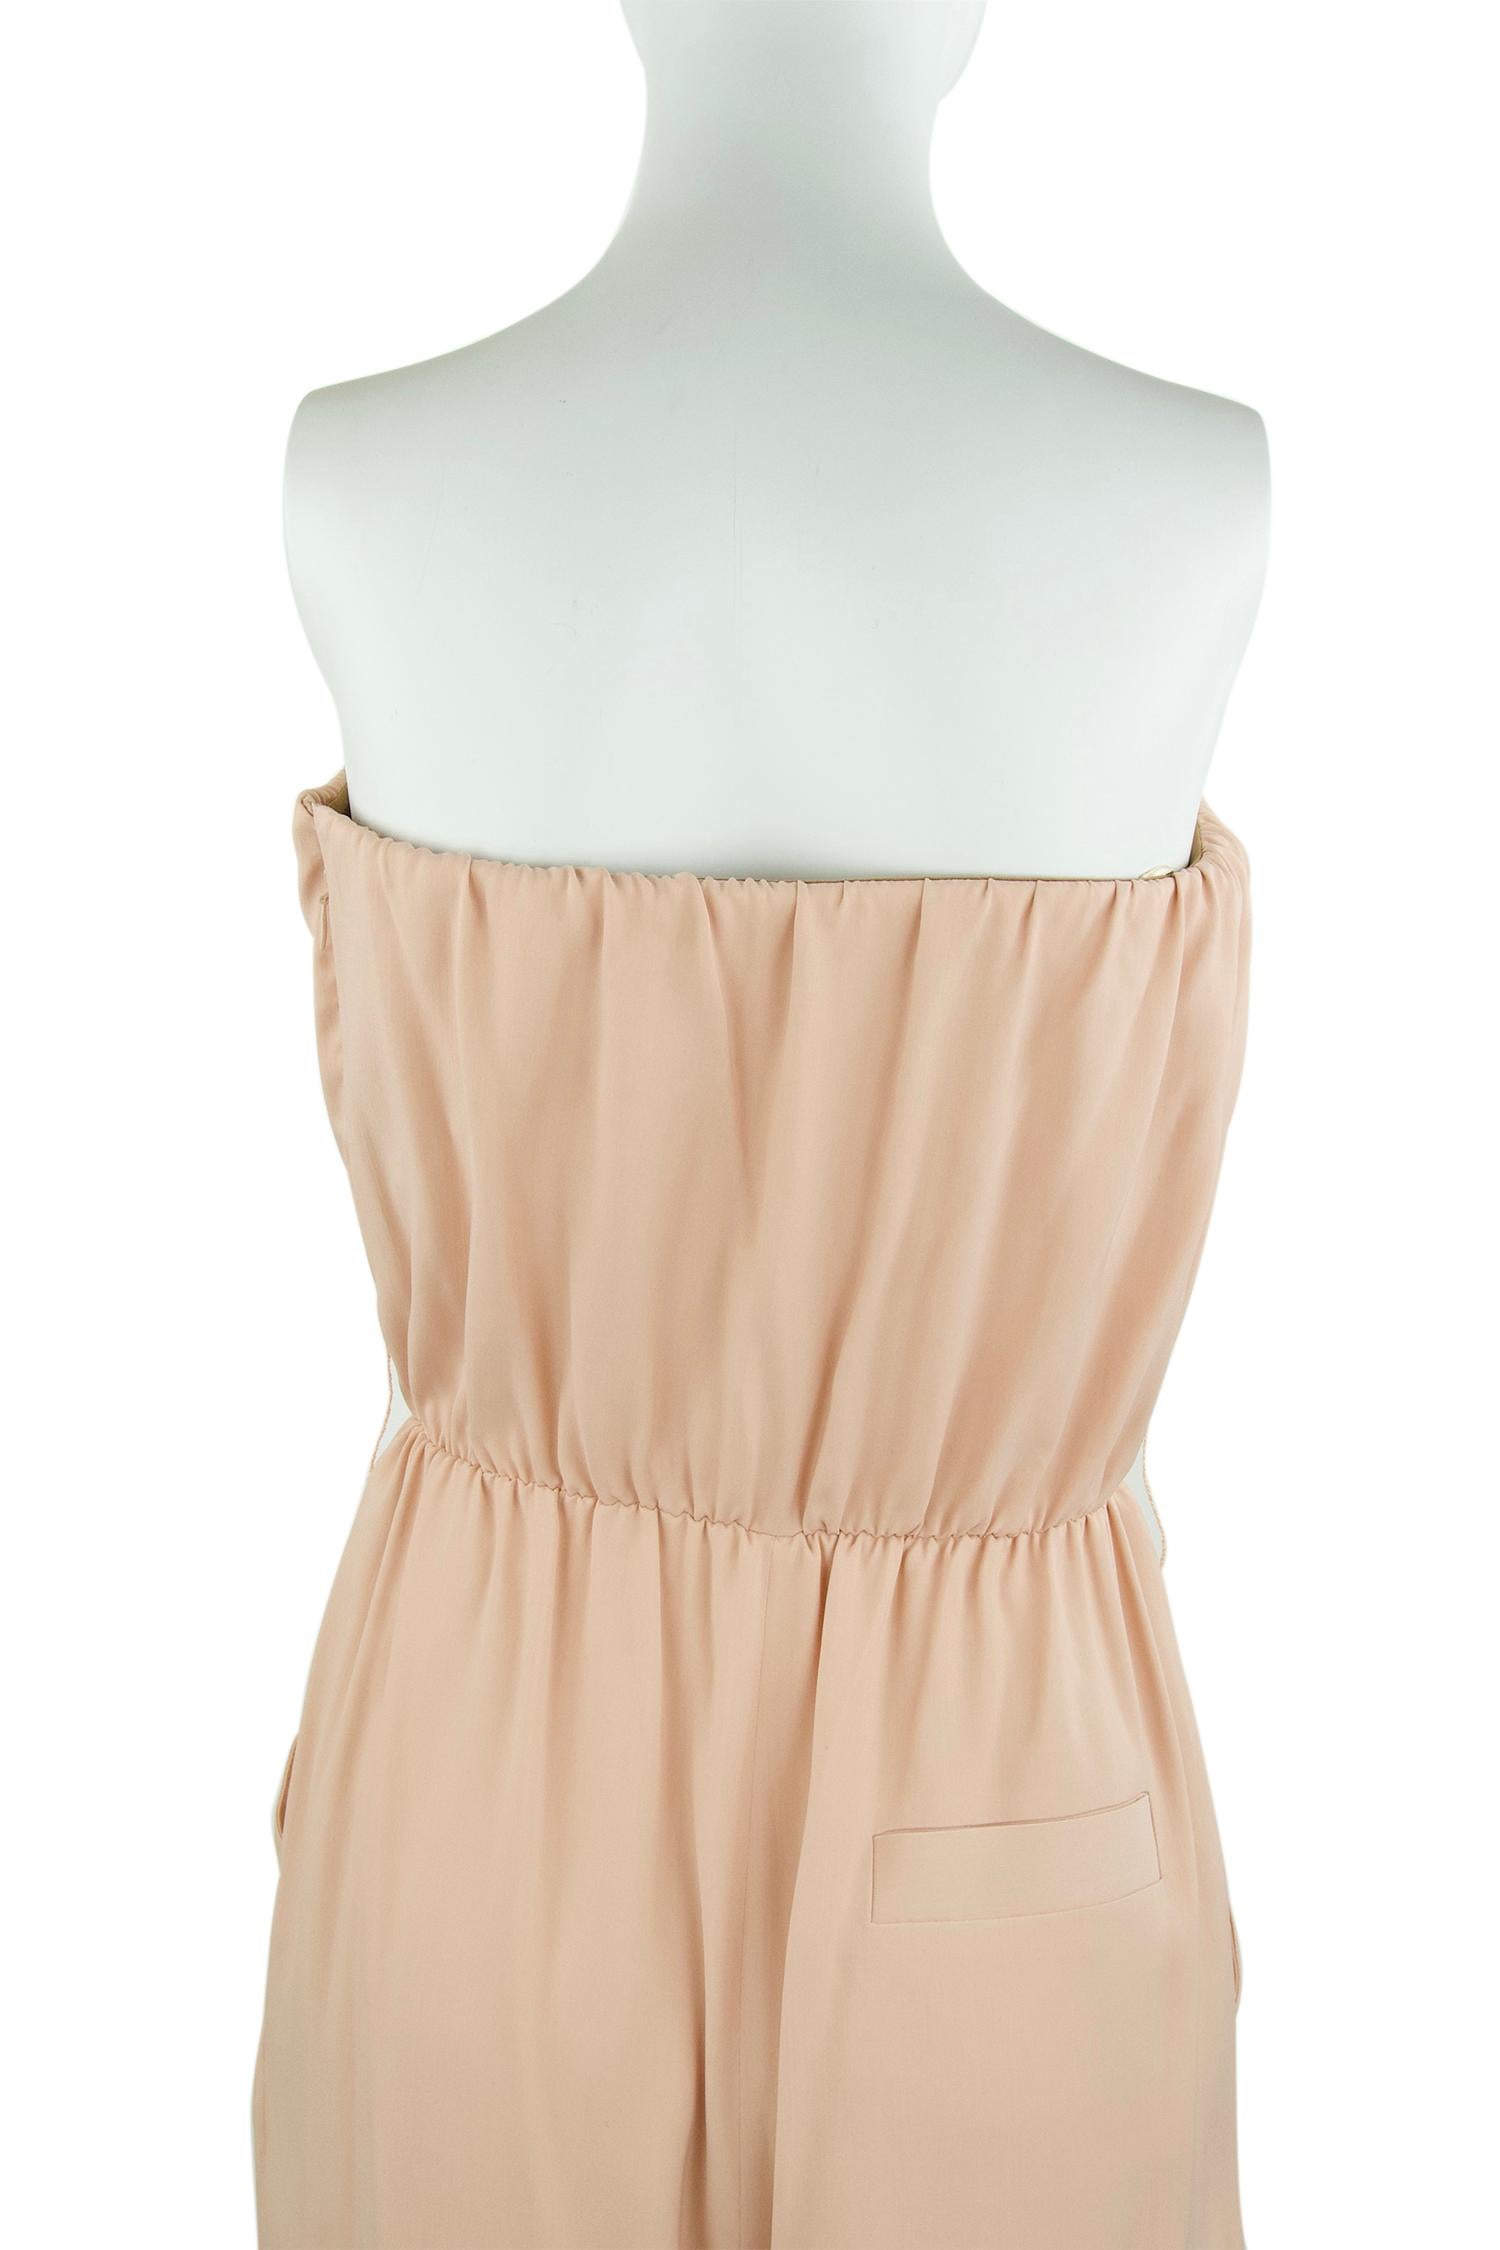 Viktor & Rolf Light Pink Strapless Jumpsuit - Size M In Excellent Condition For Sale In Newport, RI